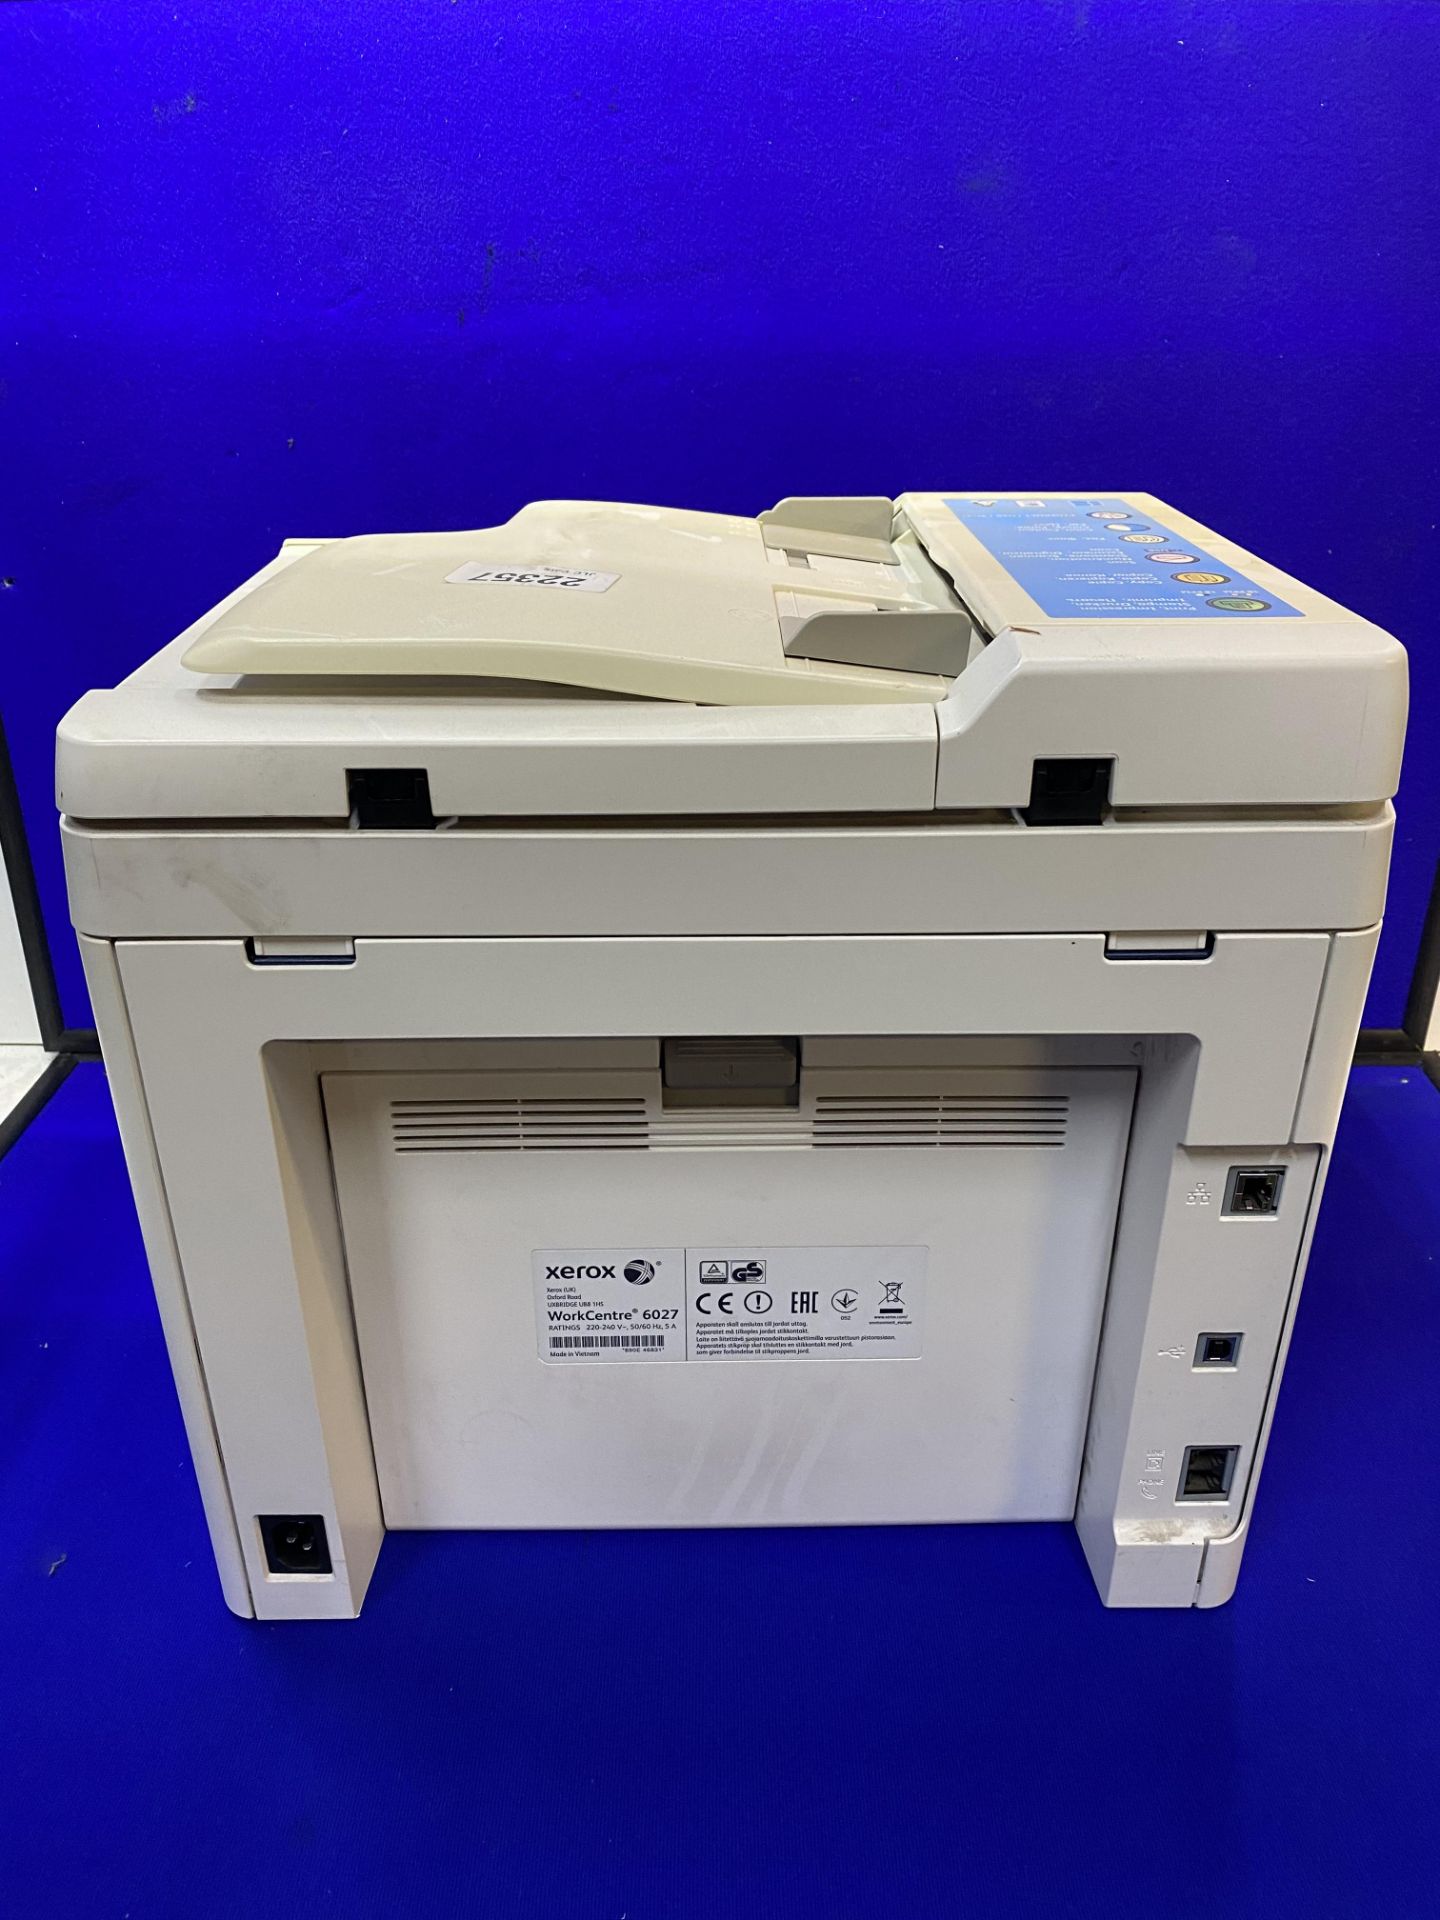 Xerox WorkCentre 6027 A4 Colour Multifunction Laser Printer - Image 15 of 22